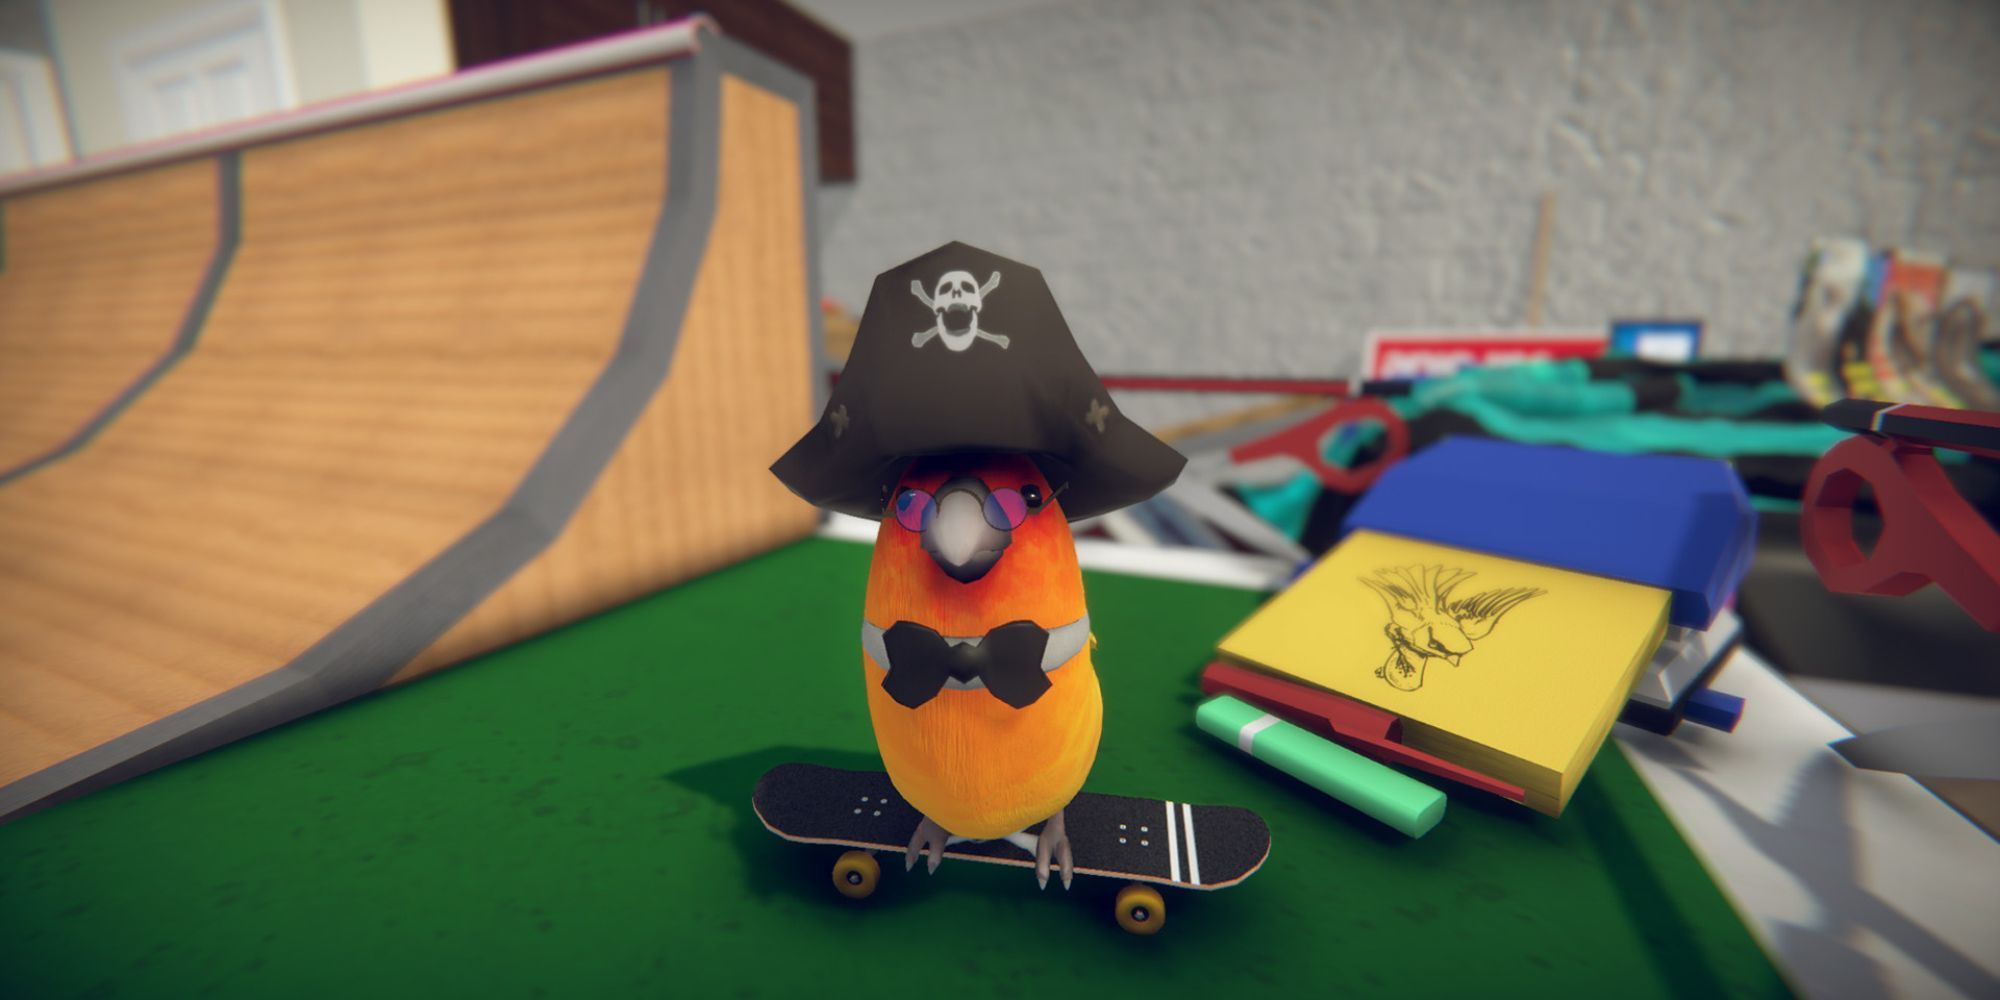 A bird with a pirate's hat on a skateboard